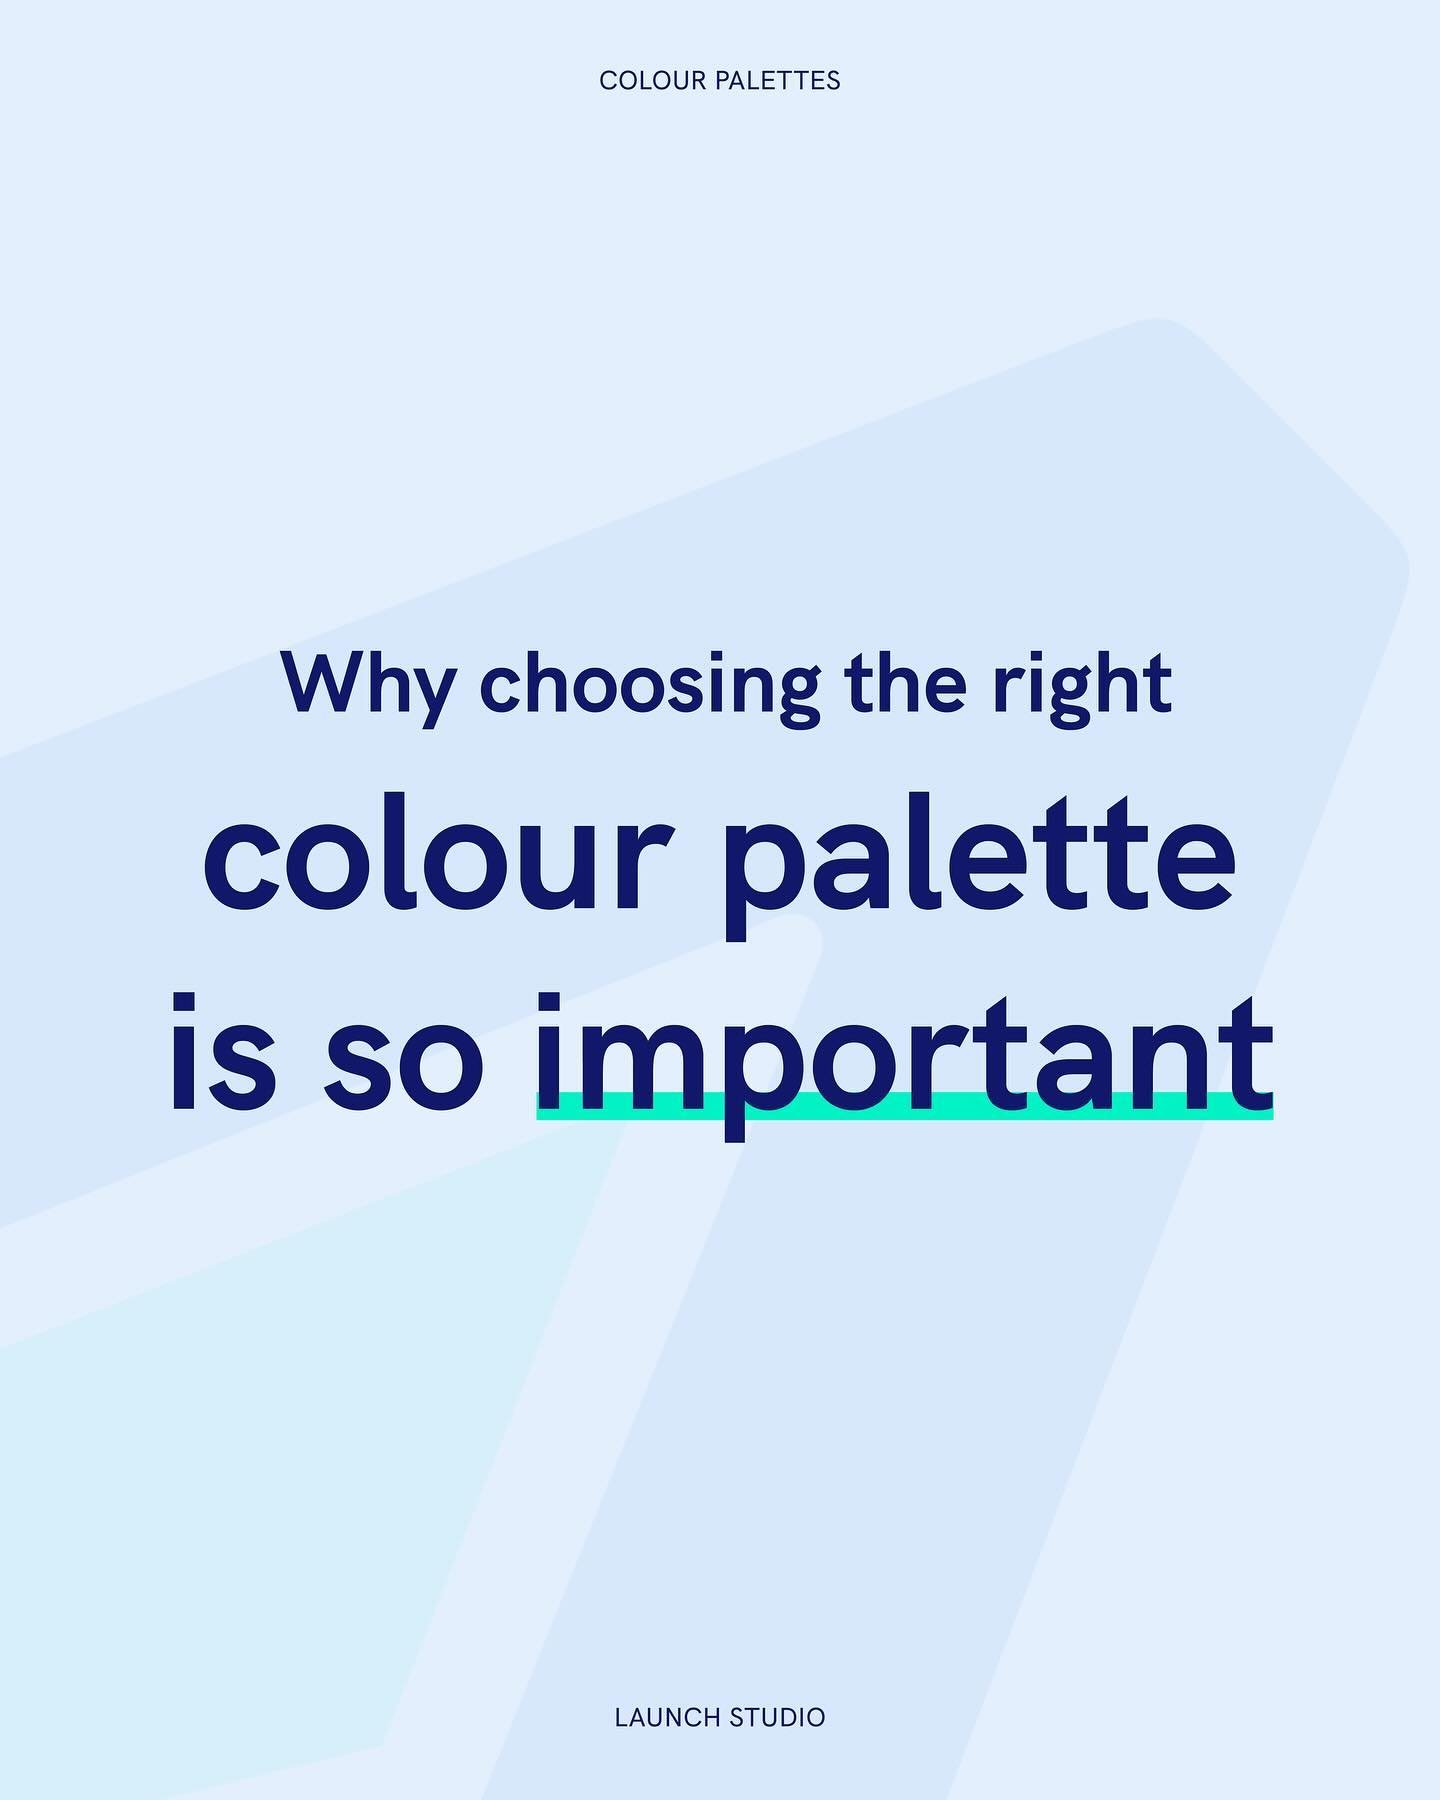 Swipe to discover why selecting an appropriate colour palette for your brand is crucial in reflecting its values! 🎨 💫

If you require our assistance to enhance your brand&rsquo;s visual identity, don&rsquo;t hesitate to contact us! 📲

#Colourpalet